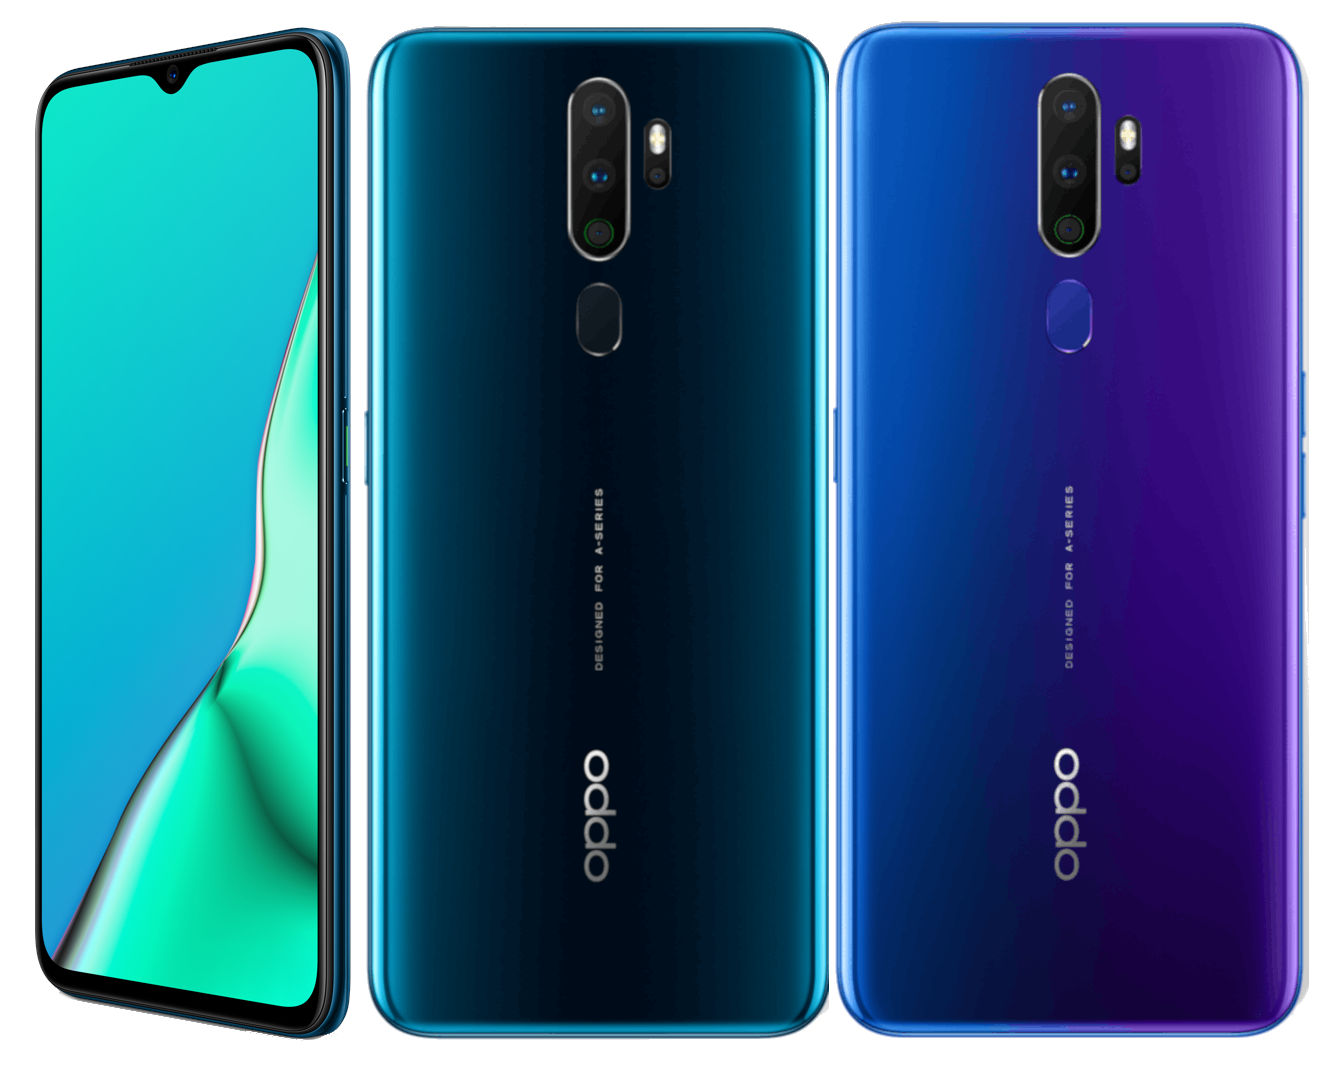 OPPO A9 2020 4GB RAM variant gets a price cut in India, now available